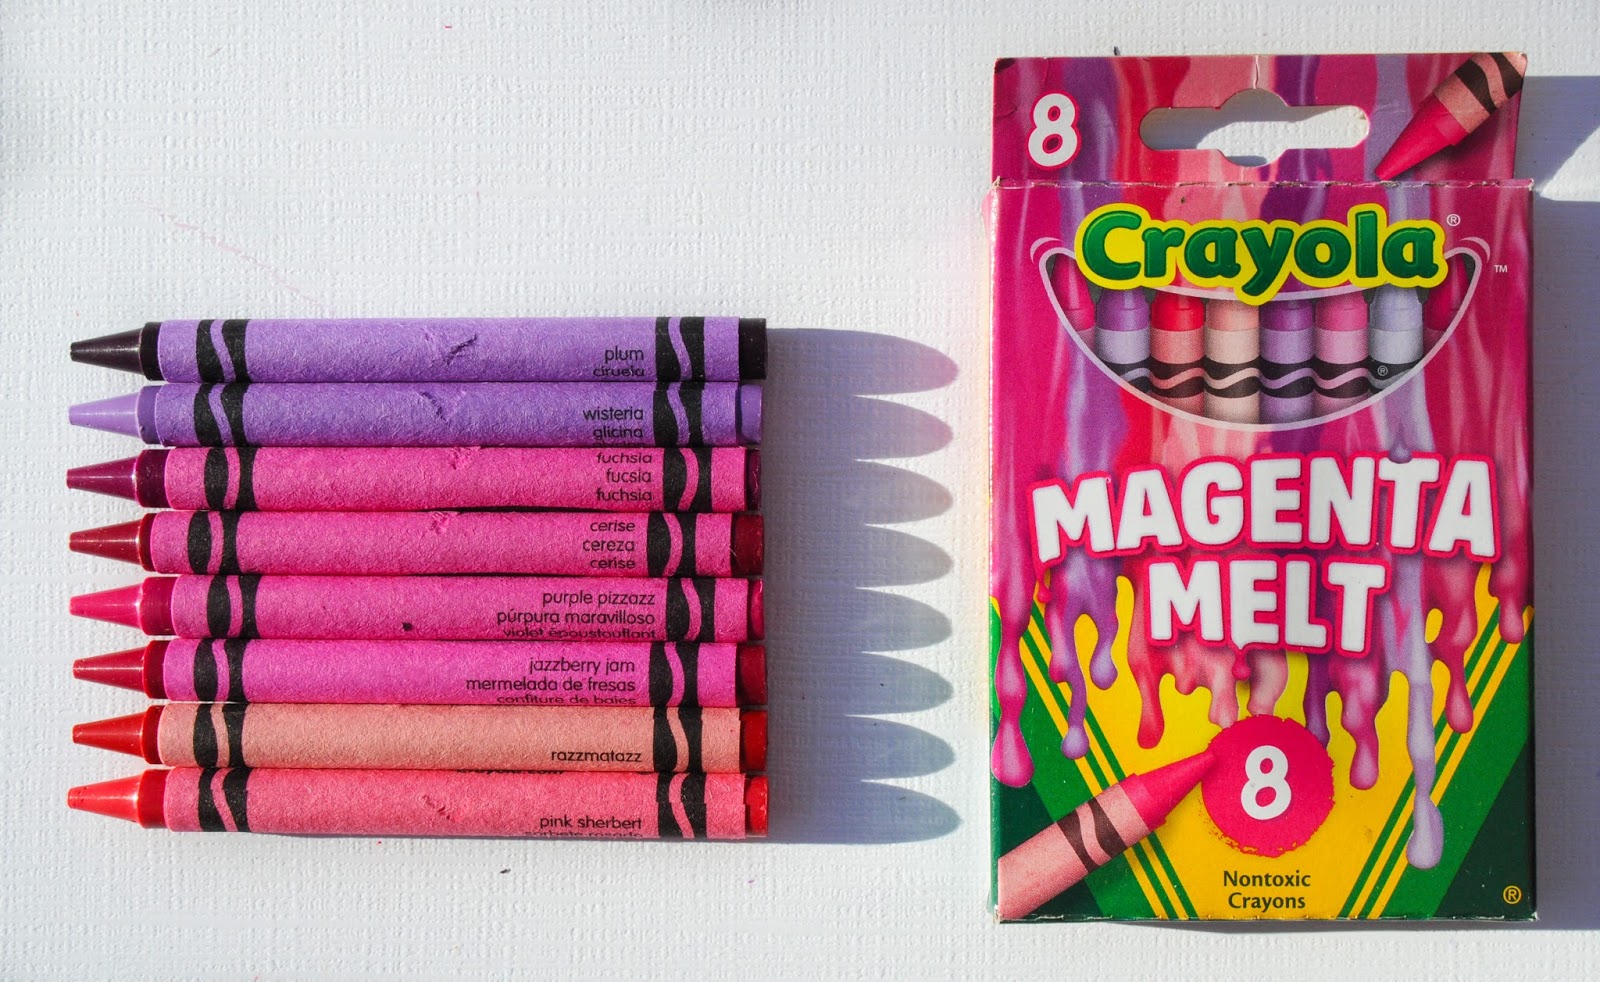 8 Count Crayola Meltdown Crayons: What's Inside the Box